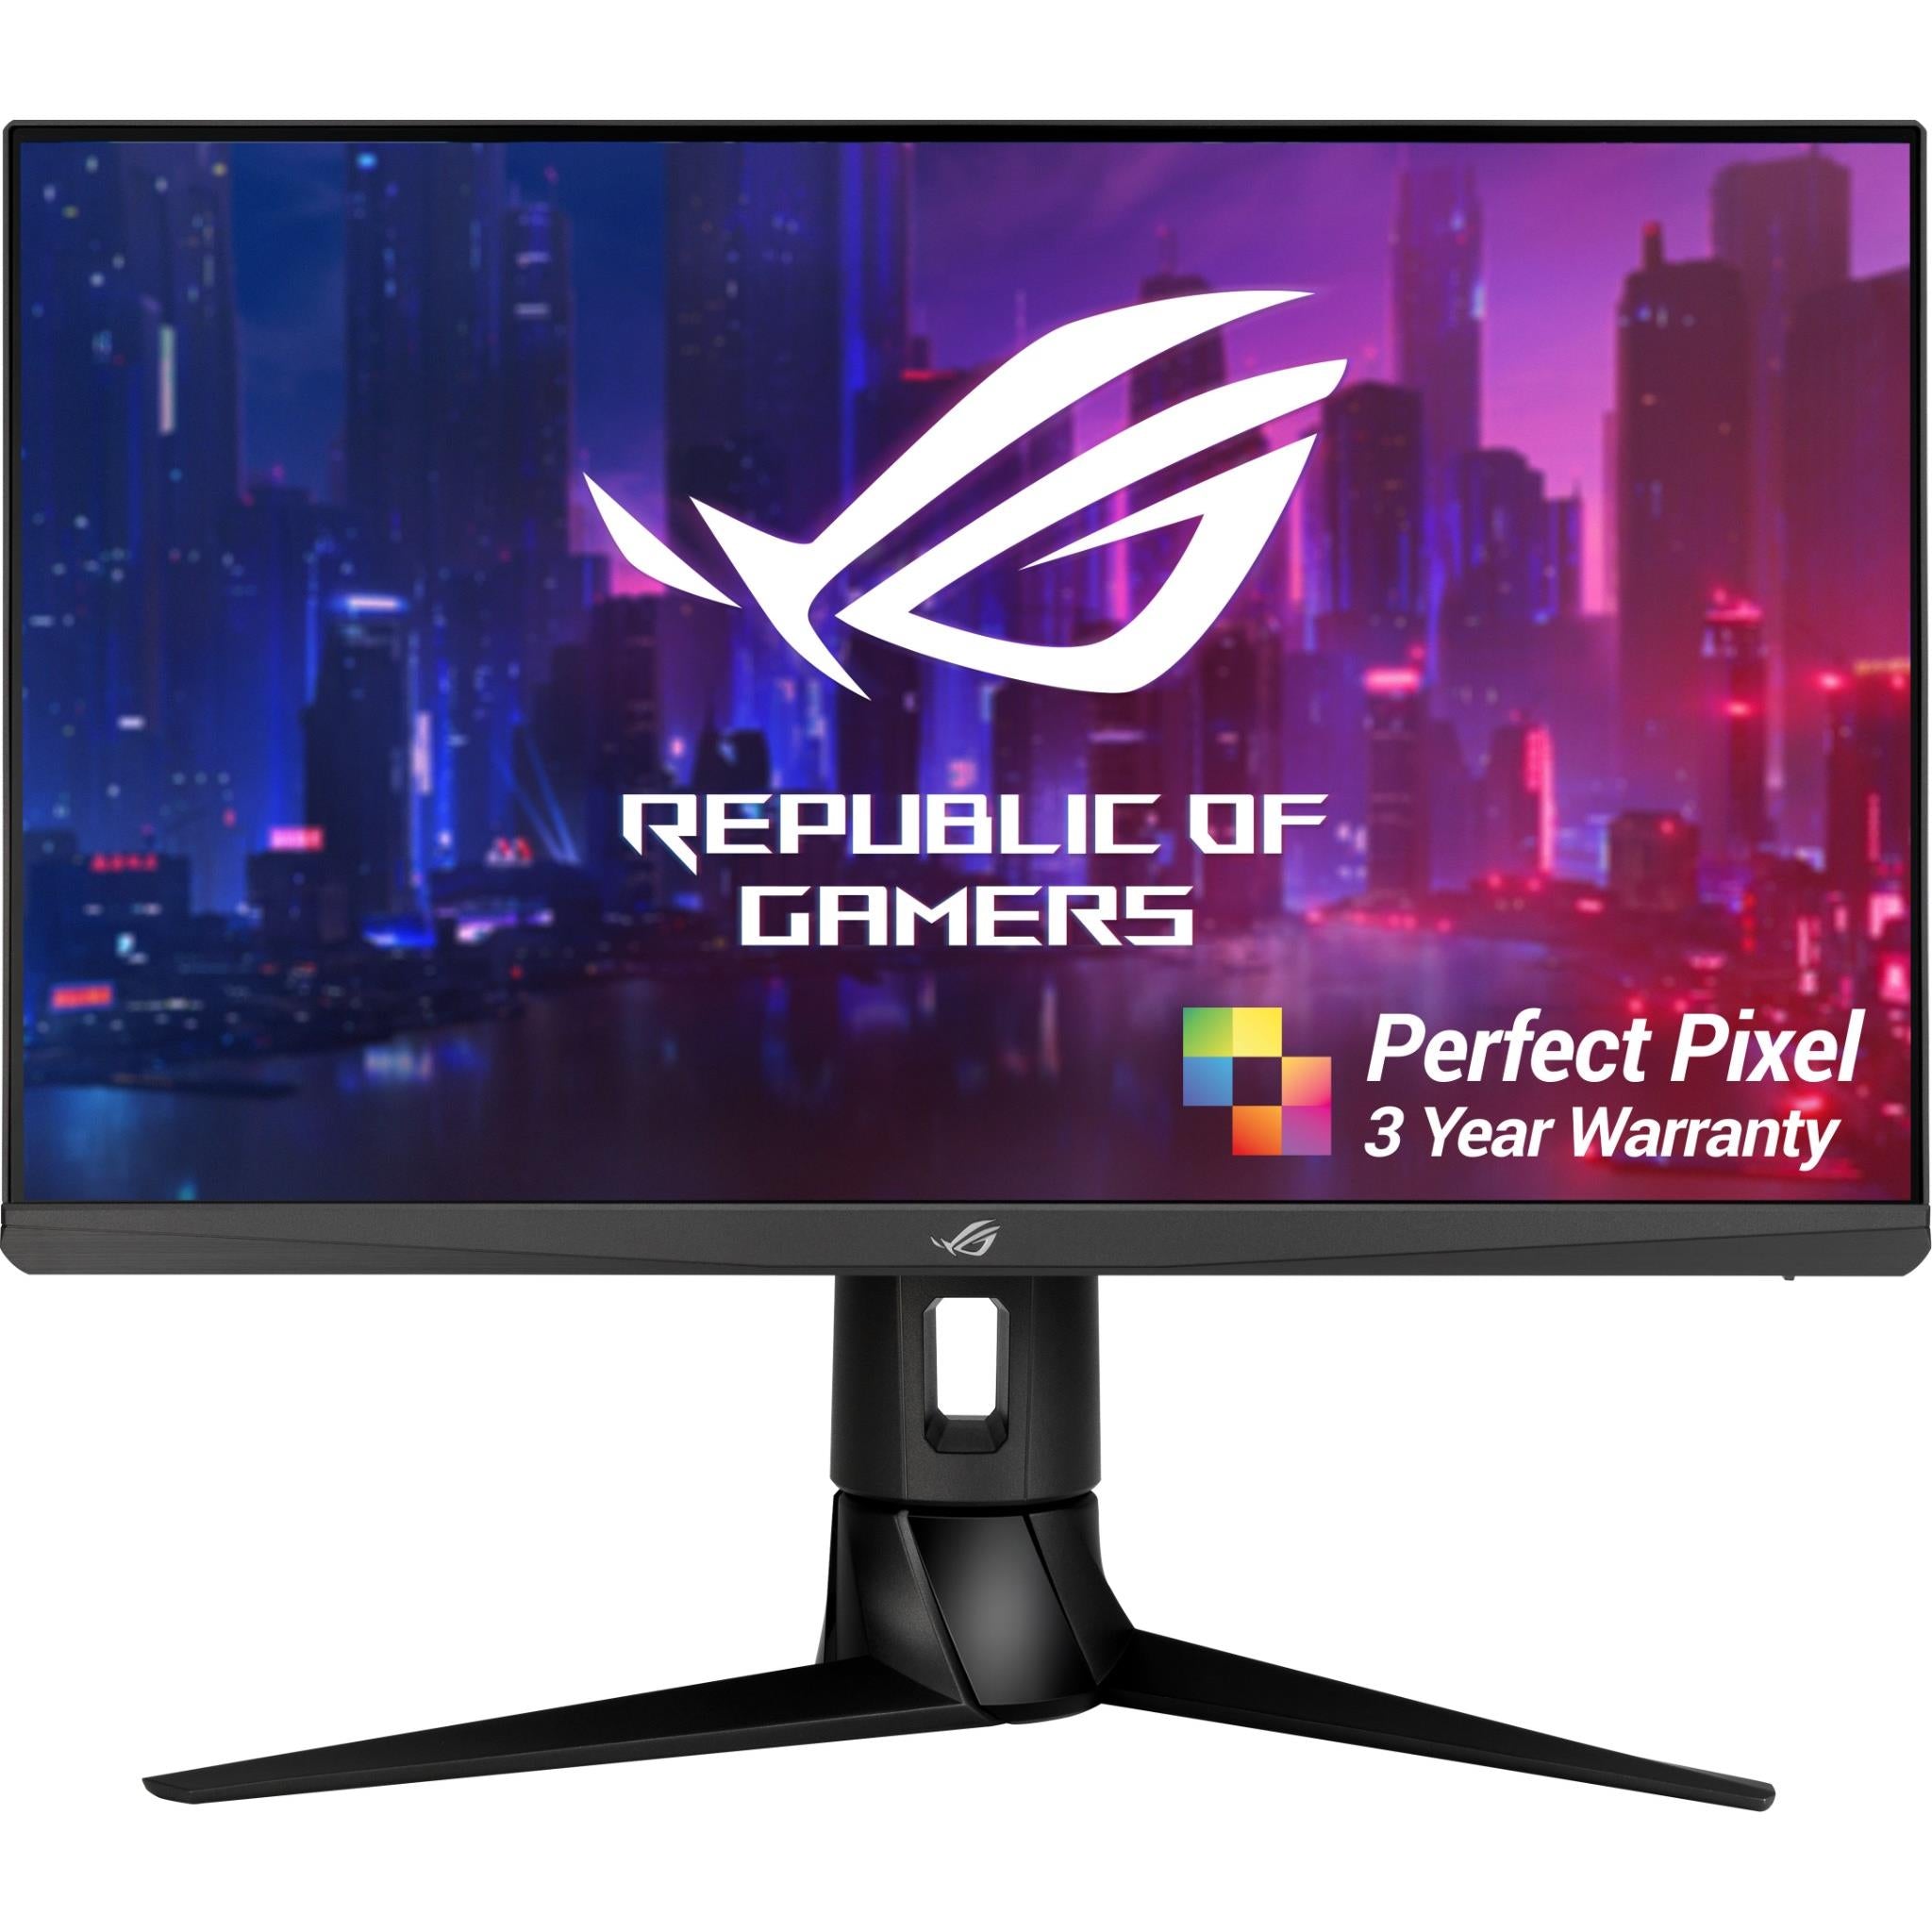 Asus Tuf Vg24vq 24 Full Hd 1920 X 1080 1ms Mprt 144hz 2 X Hdmi Displayport Amd Freesync Asus Eye Care With Ultra Low Blue Light Flicker Free Backlit Led Curved